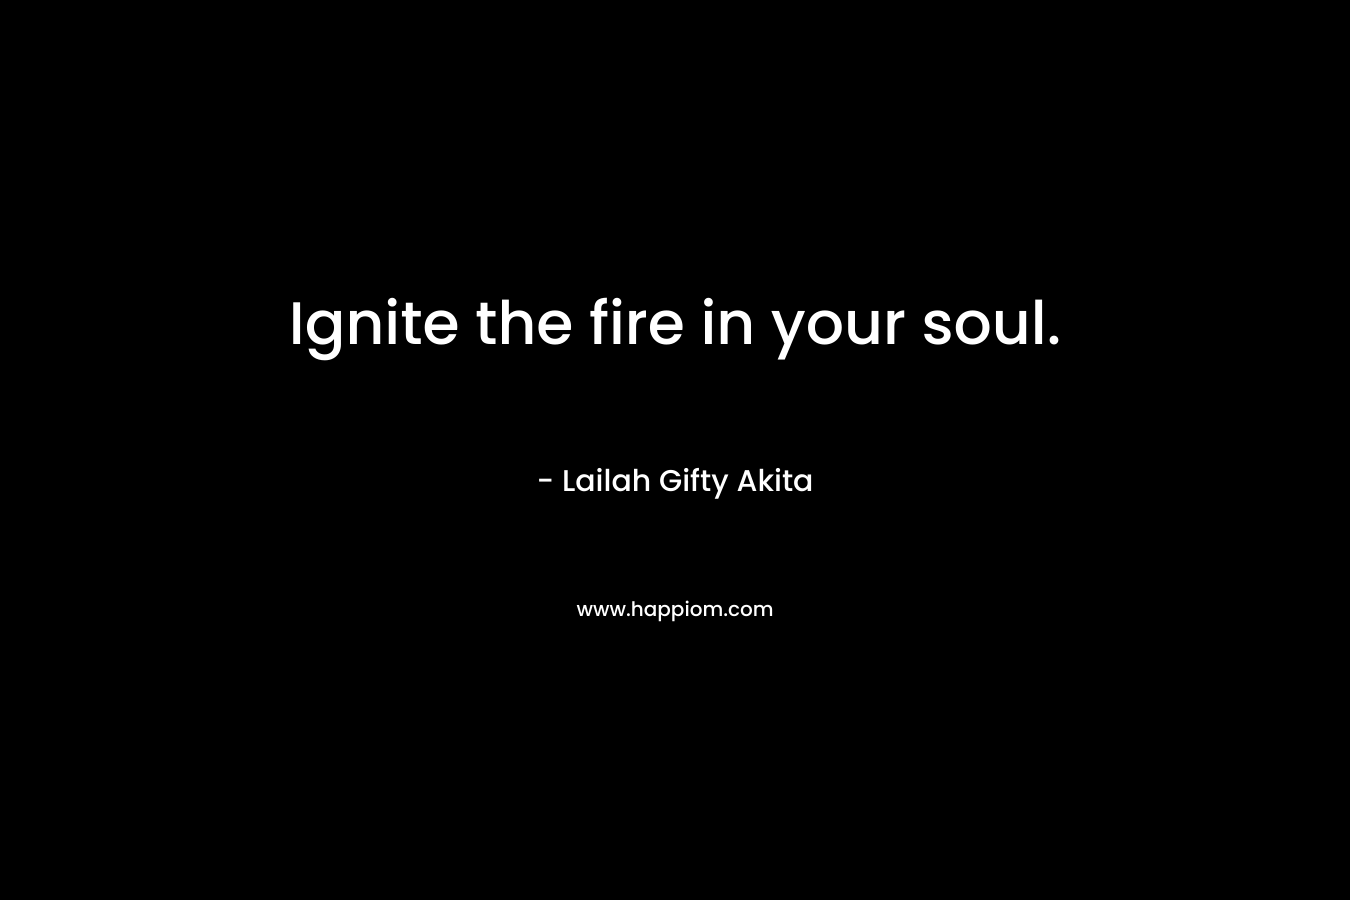 Ignite the fire in your soul.